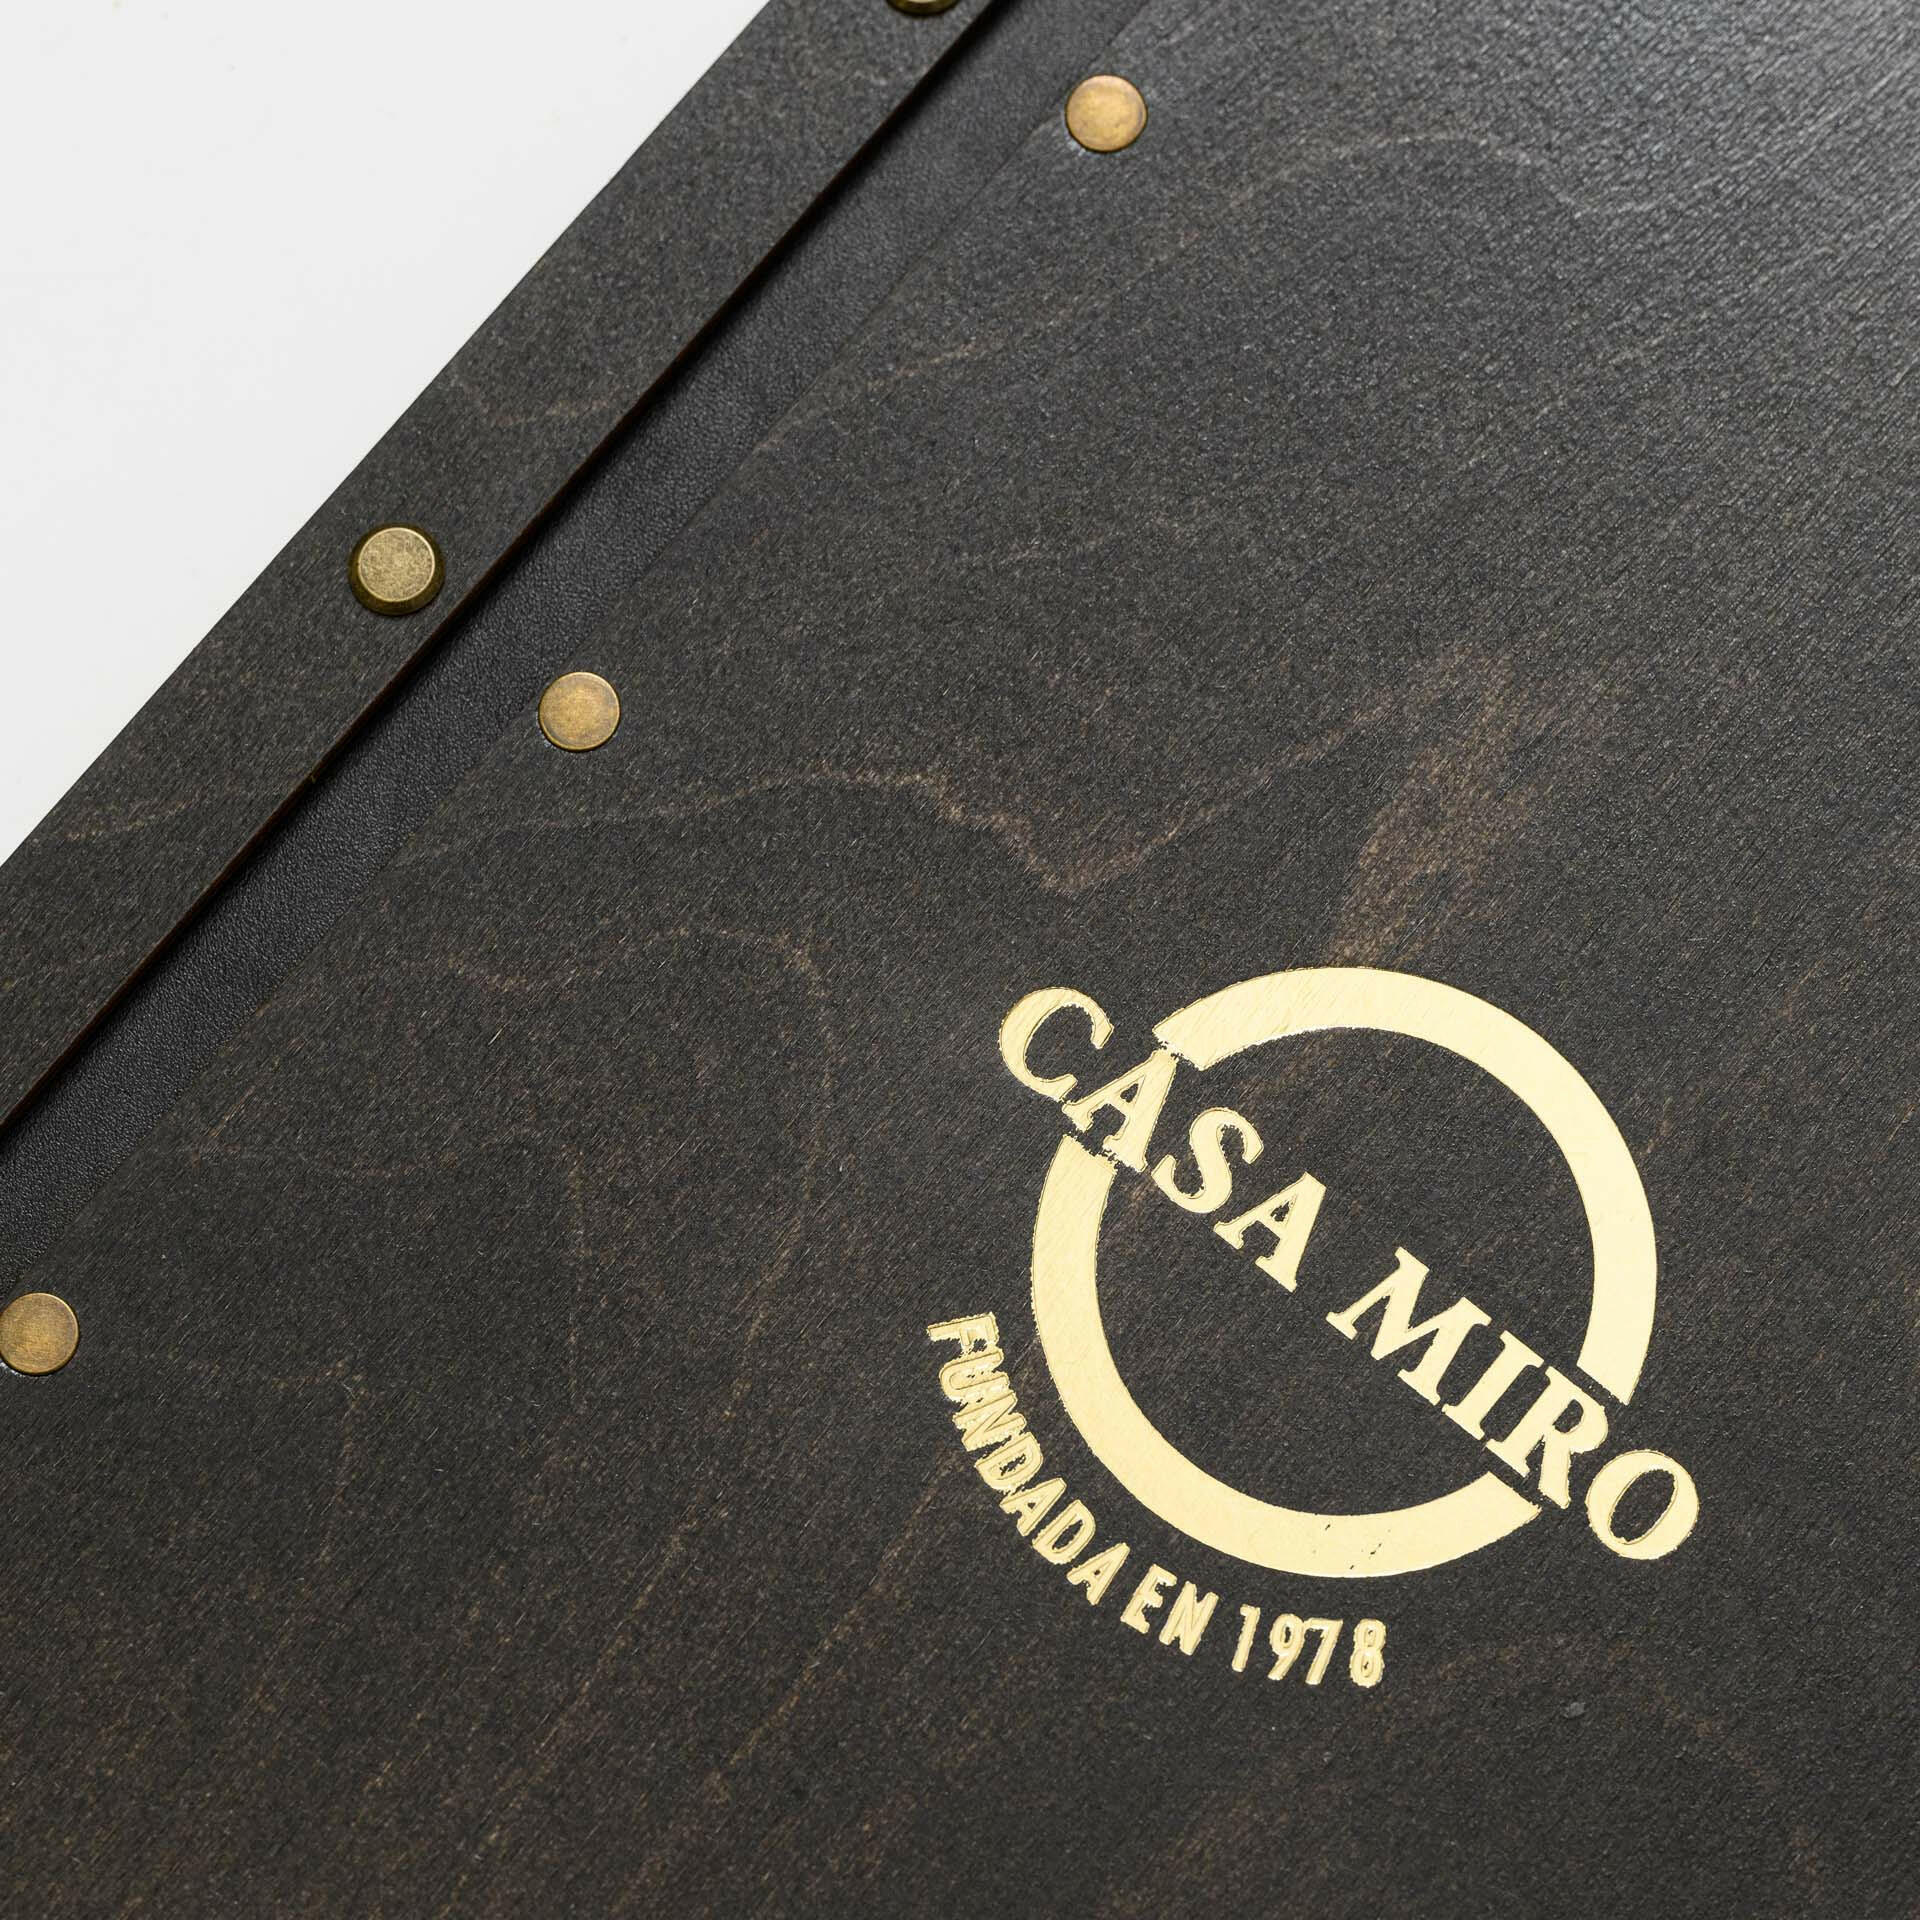 Customizable Wooden Menu Folder: Allows for personalized touches to suit your restaurant's style.